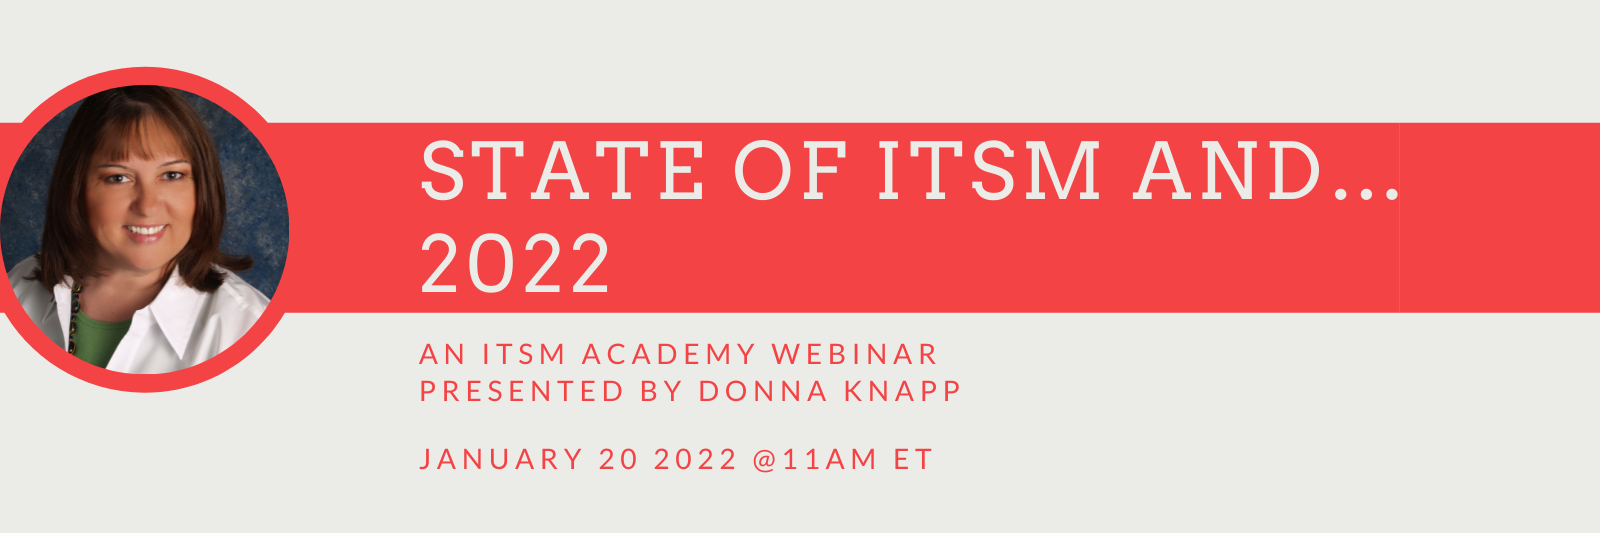 State of ITSM and... 2022